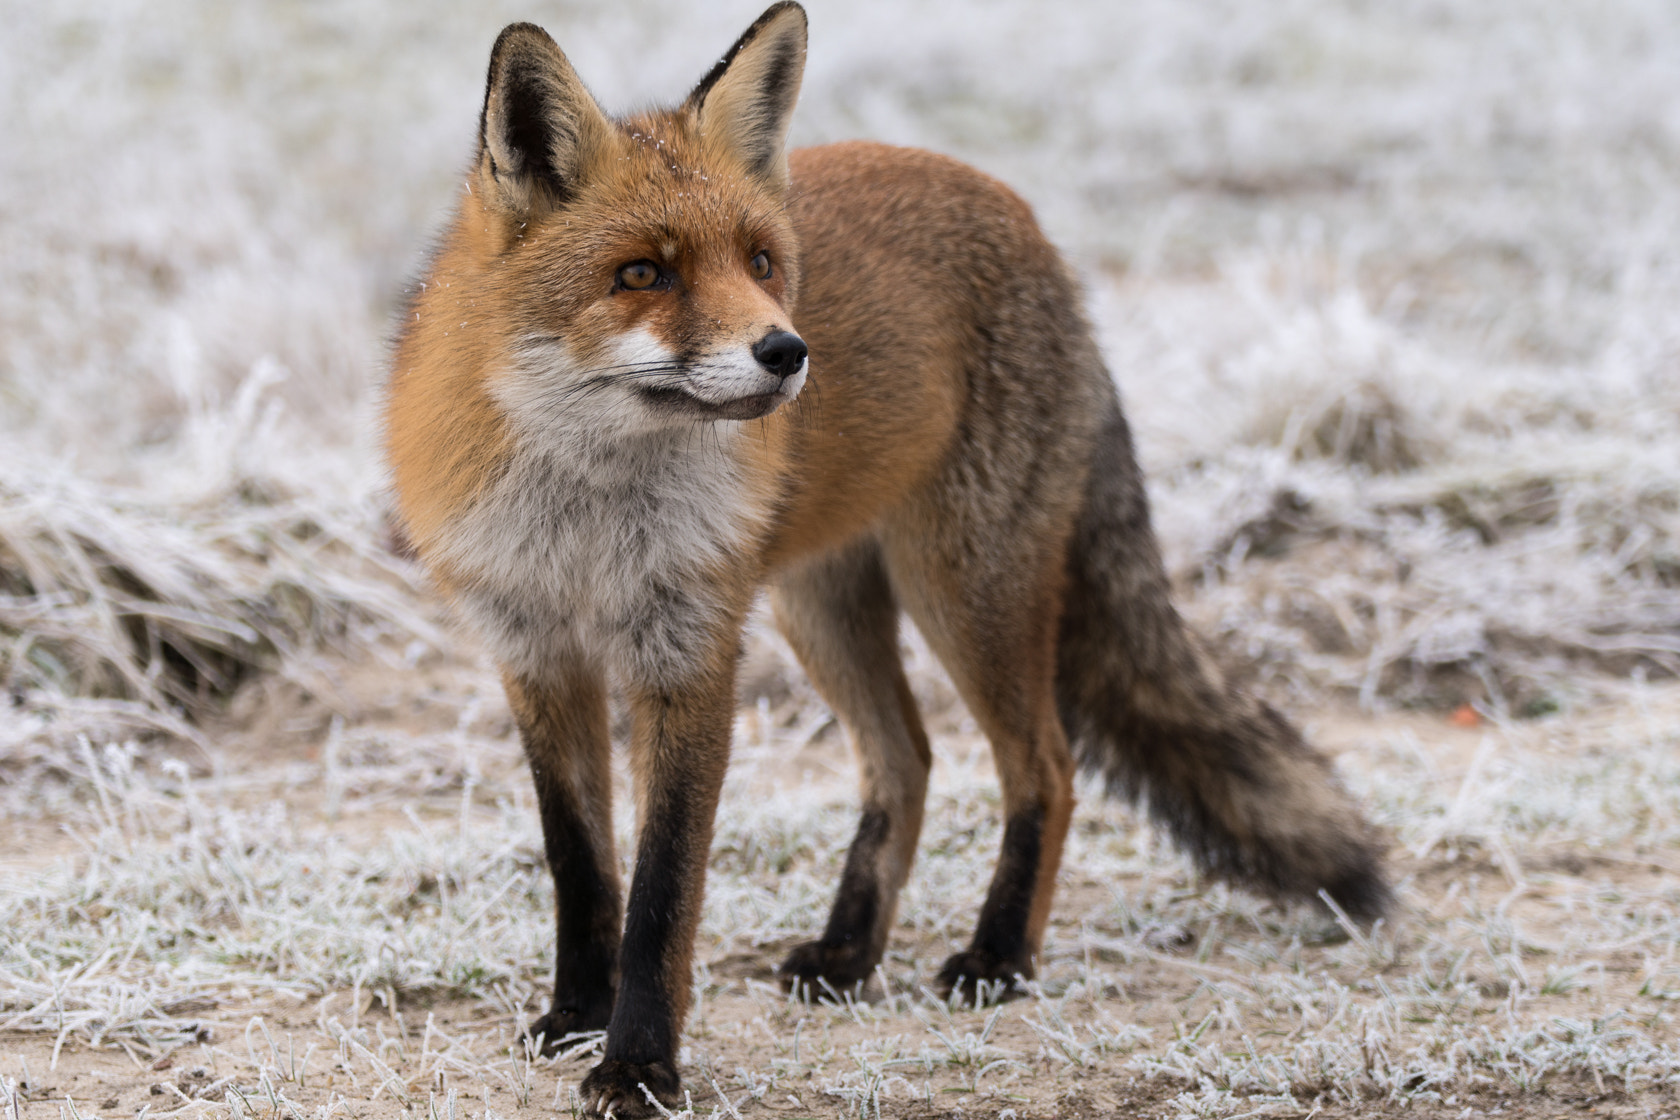 Sony a6500 sample photo. Red fox, winter 2017 photography